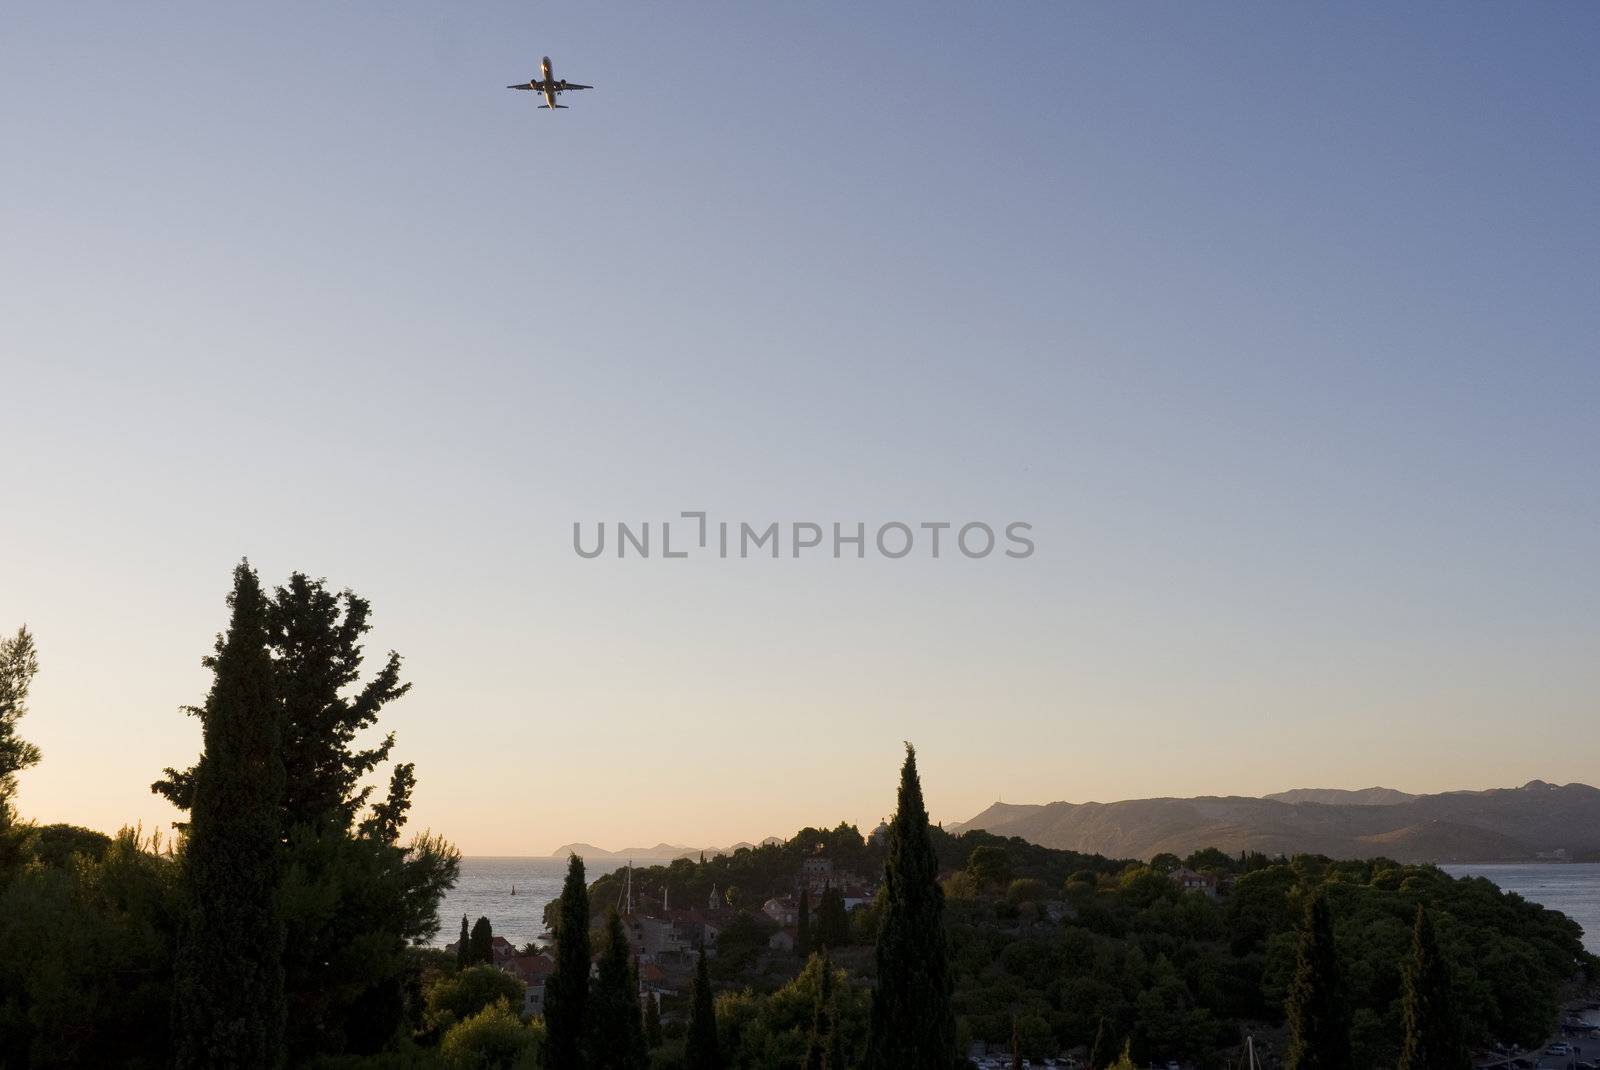 Aeroplane ready for landing in the Airport of Dubrovnik - seen from my balcony in Cavtat, Croatia at sunset.